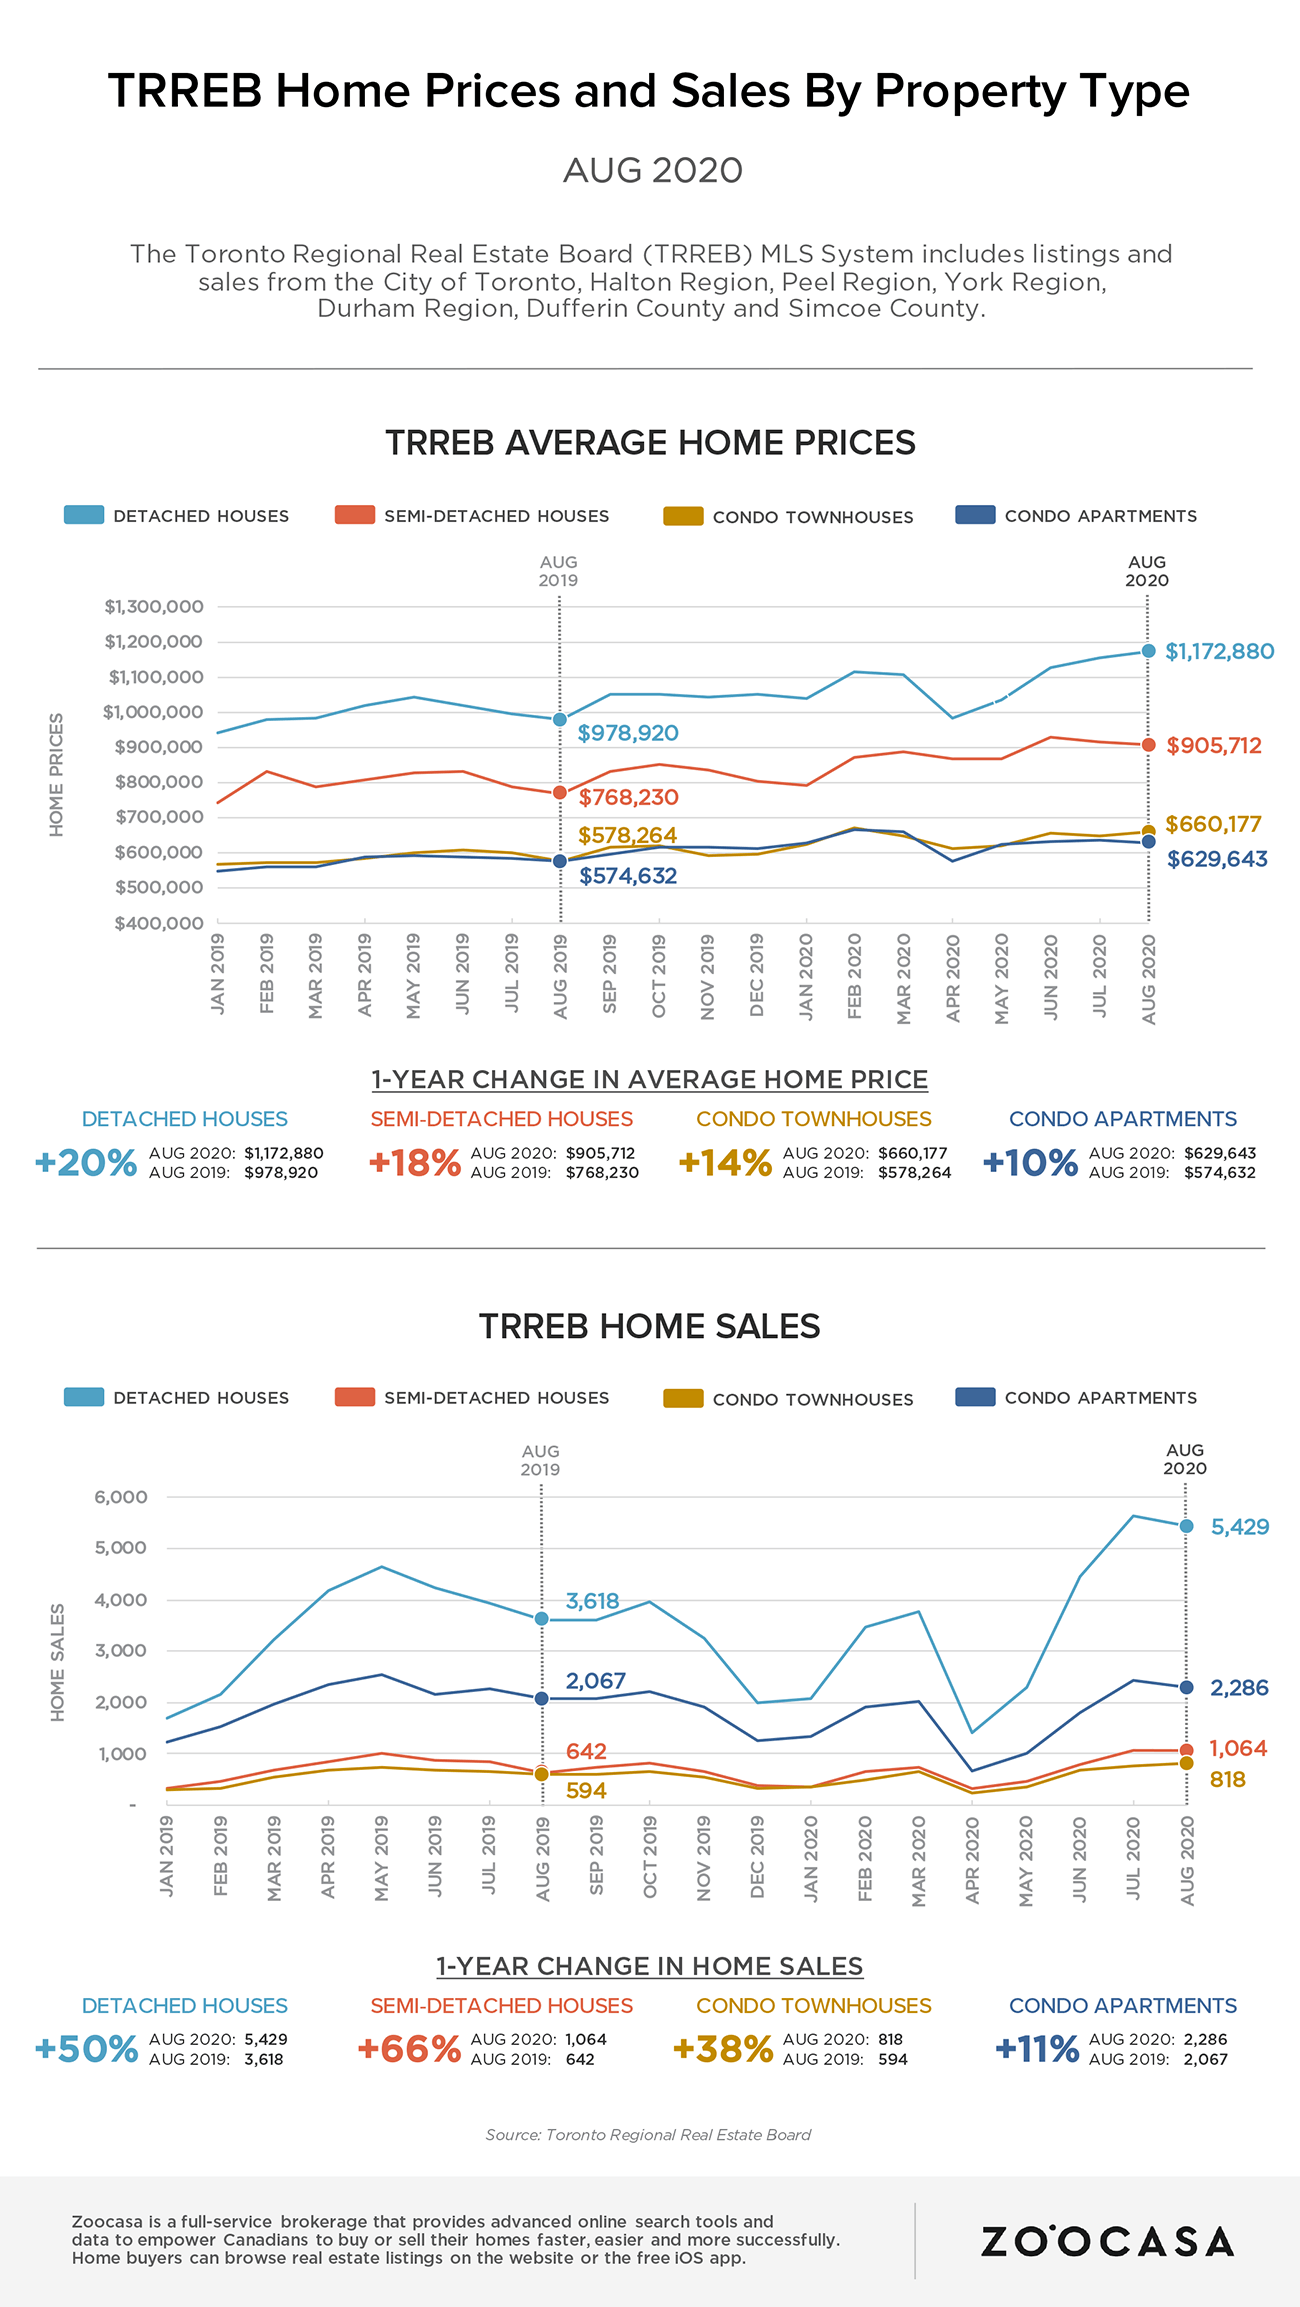 Toronto region home prices and sales in August 2020